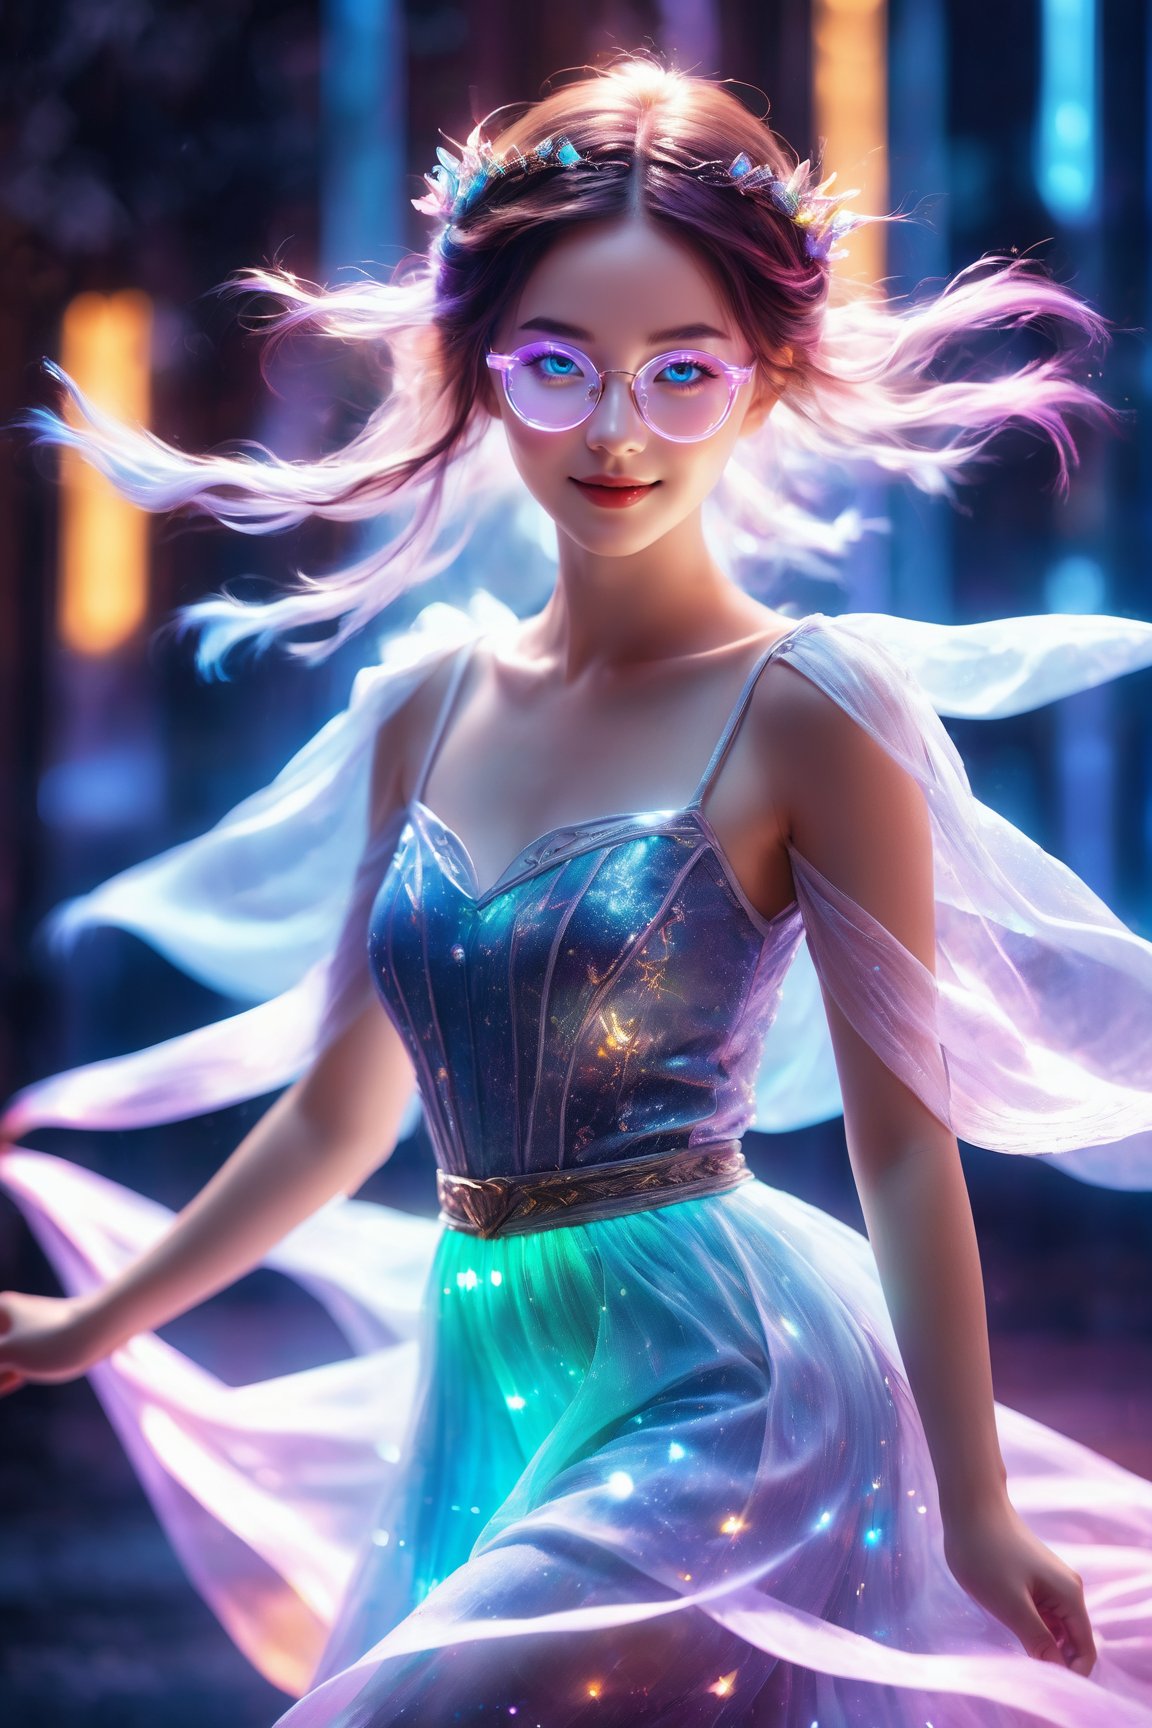 Translucent glowing body, glowing, elf model, 1 girl, snow-white skin, black neon lights, long exposure, motion blur, 1 girl (bright atmosphere, charming light, bright lighting, agile glasses, smile, glasses, ethereal atmosphere, mesmerizing light, unforgettable tones, charming colors, dramatic lighting, charming halo, gradient skirt),
